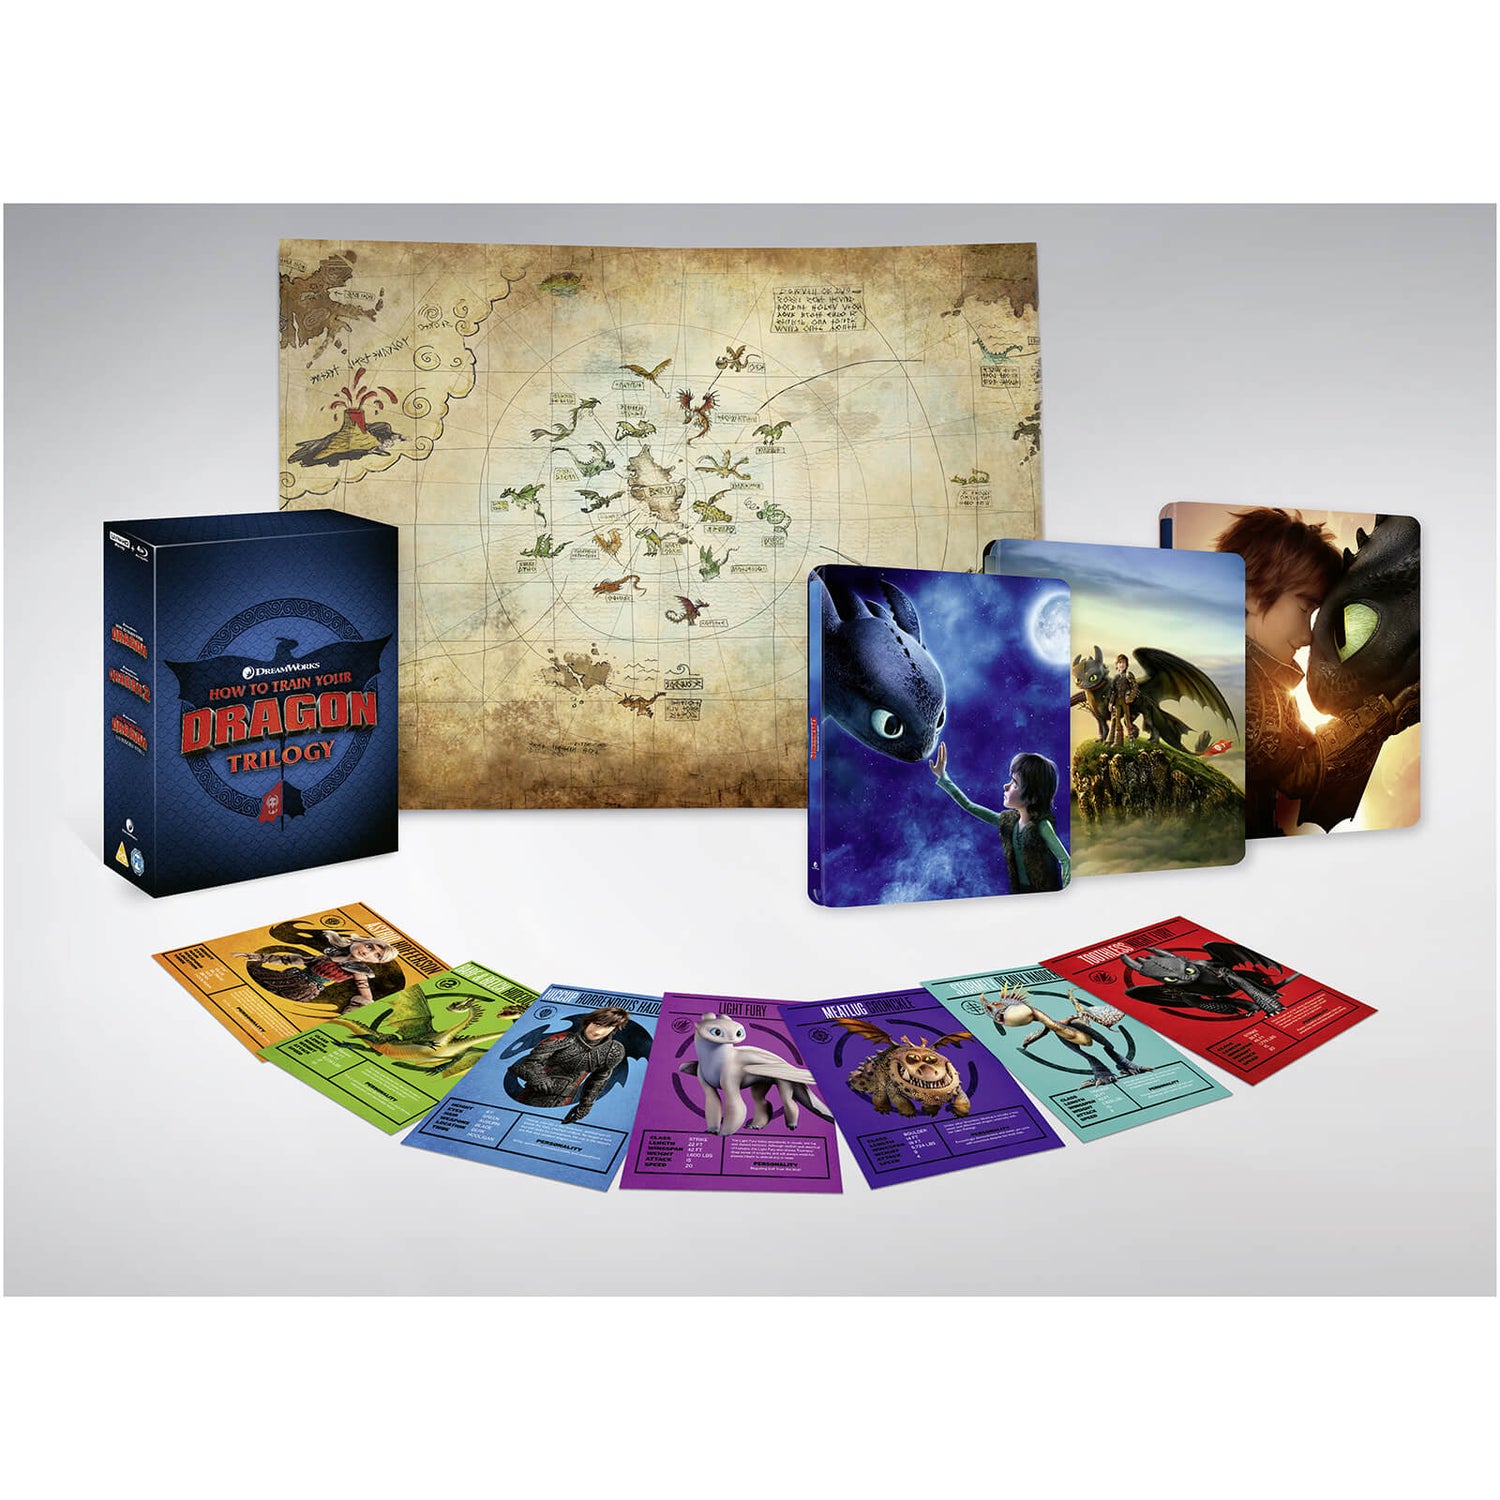 How to Train Your Dragon Trilogy - Zavvi Exclusive 4K Ultra HD Steelbook Boxset (Includes Blu-ray)